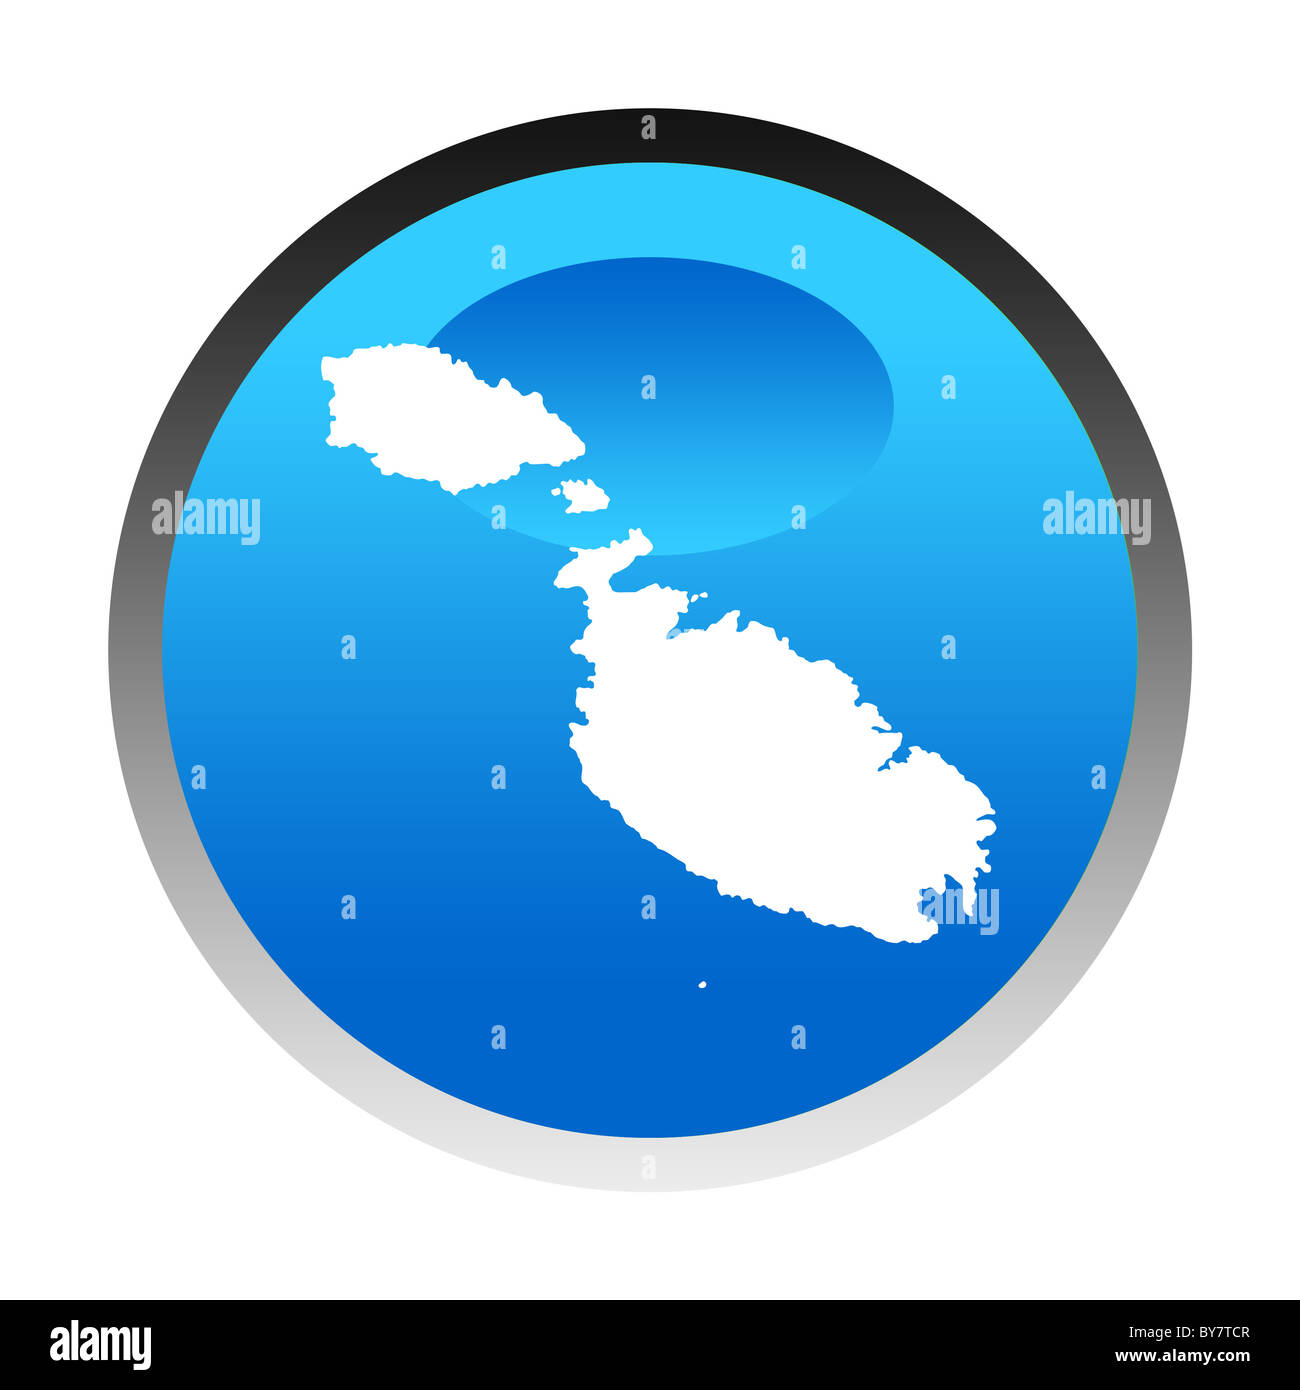 Malta map blue circular button isolated on white background. Stock Photo